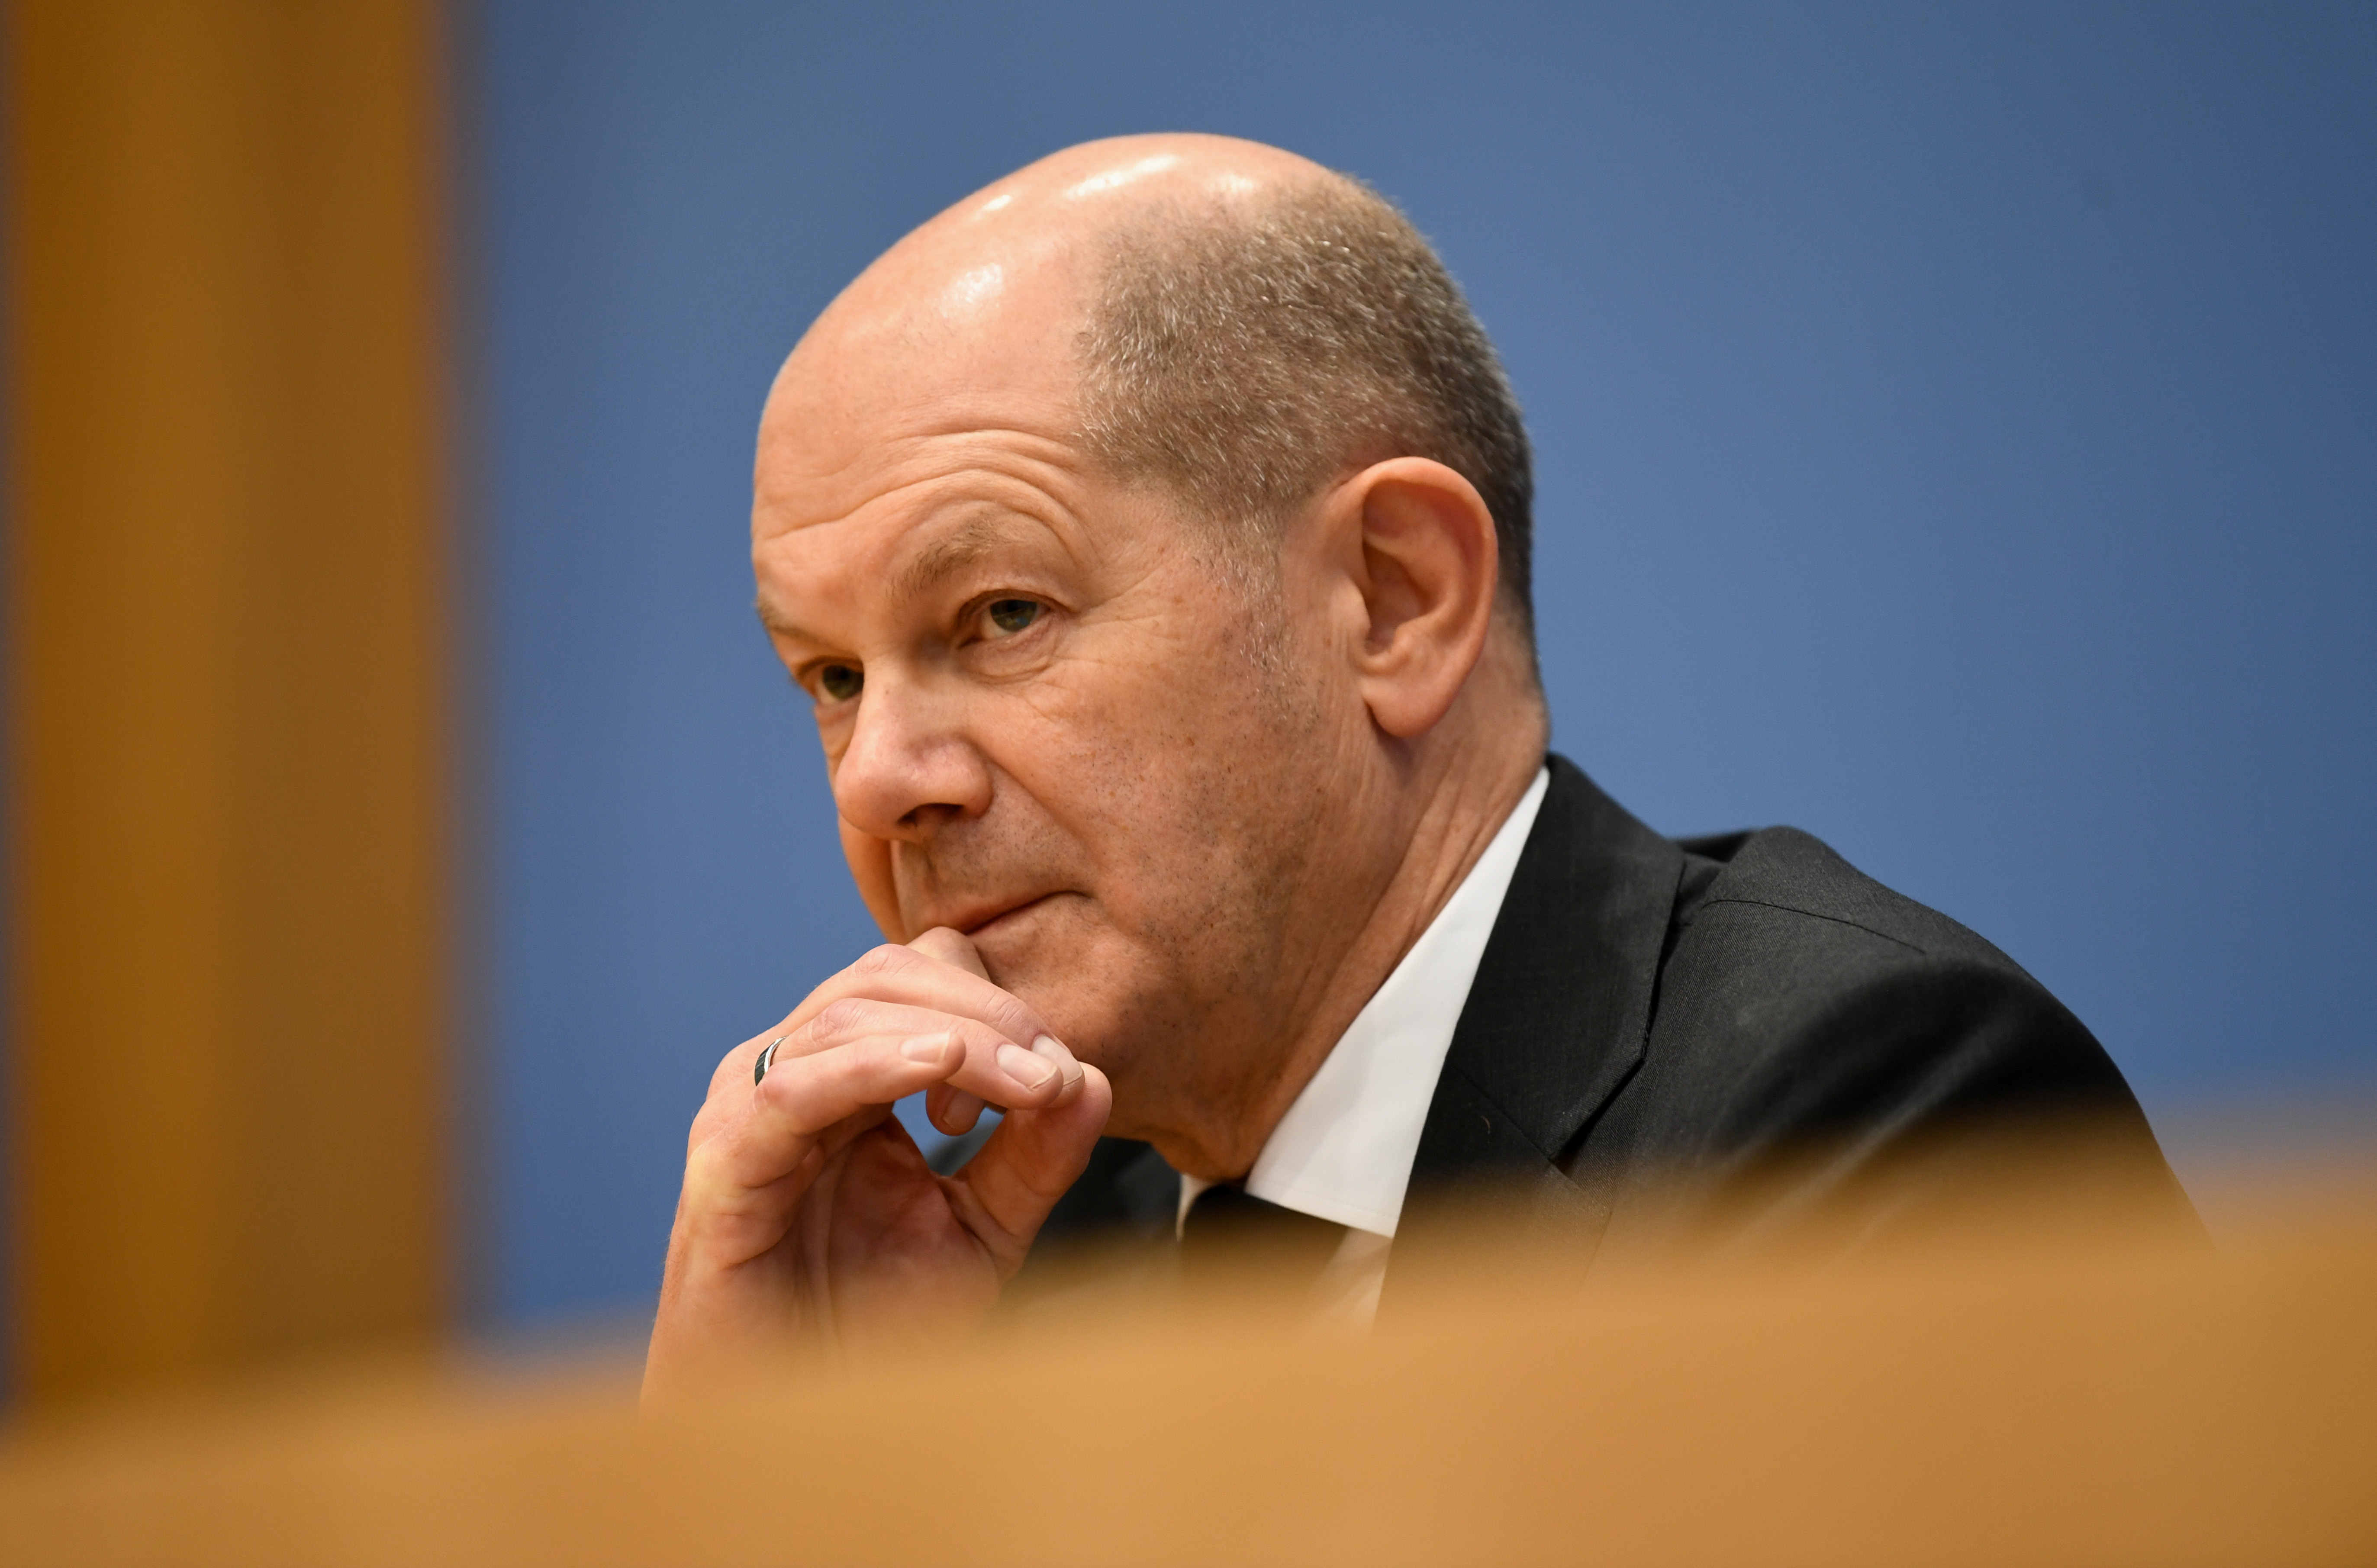 German acting Finance Minister Olaf Scholz attends a news conference on Germany's tax estimate in Berlin